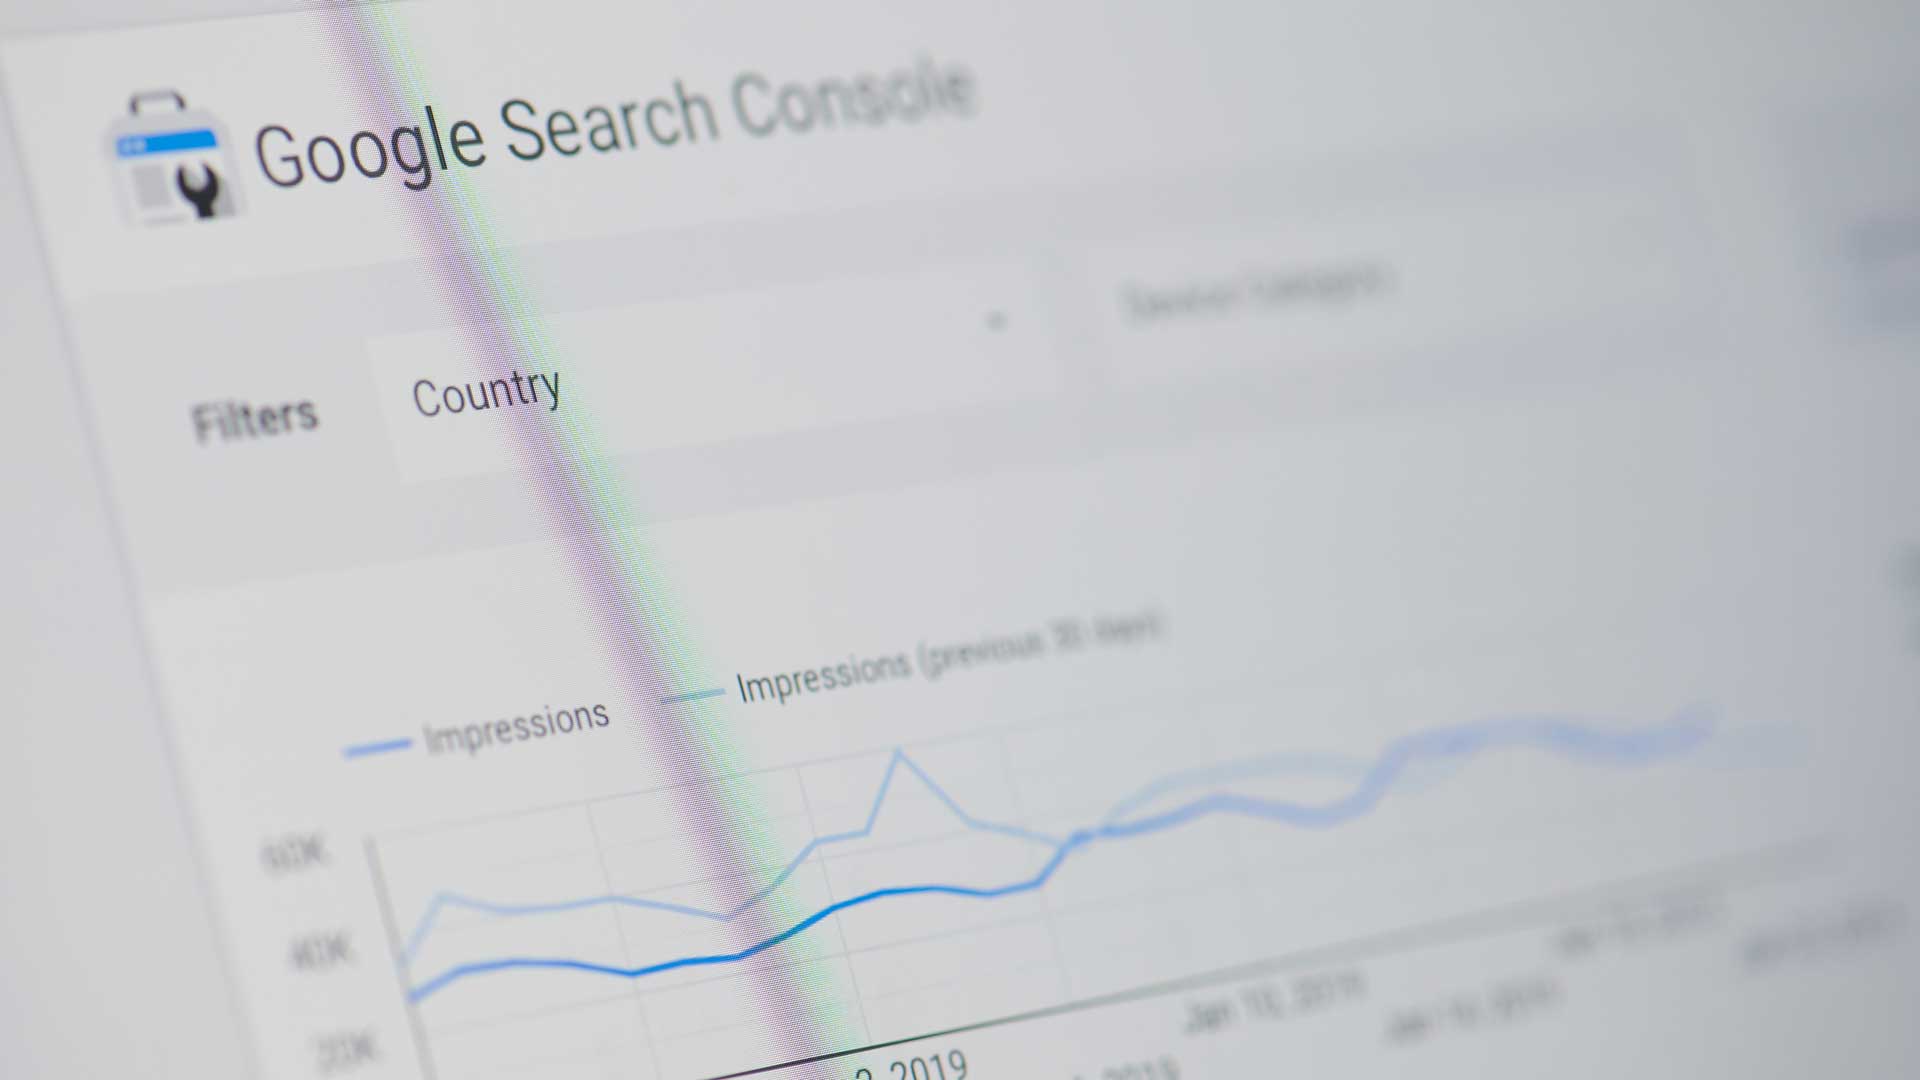 Google Search Console Insights Now Supports Google Analytics 4